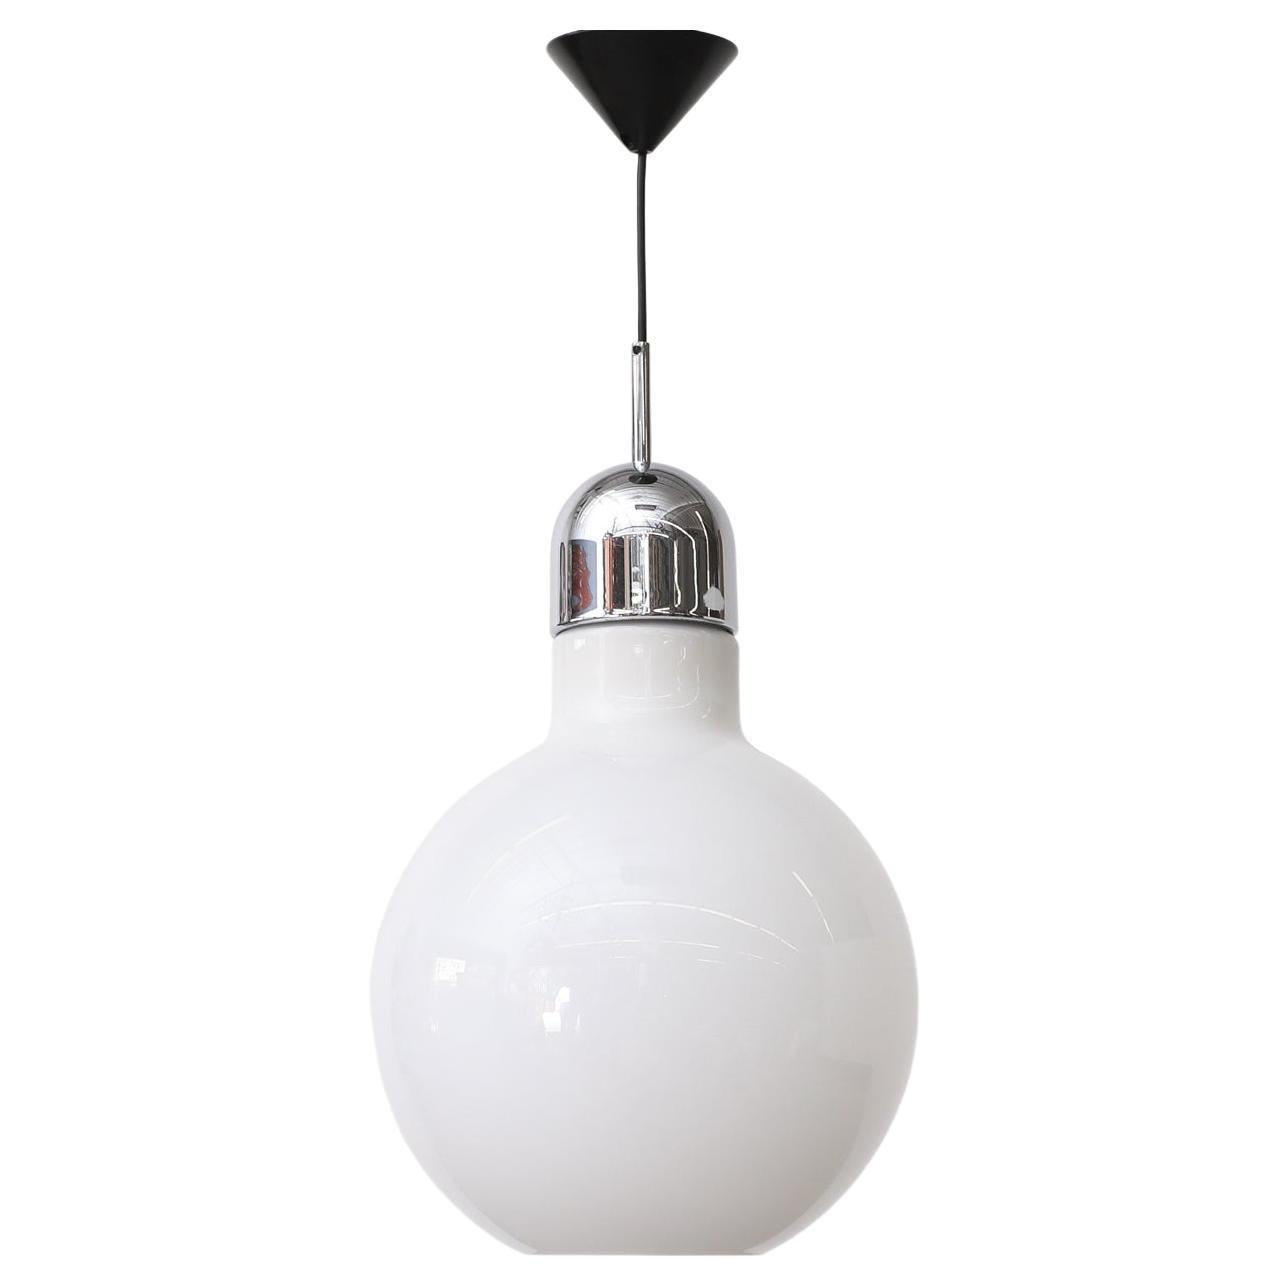 Opaline Glass Globe Pendant Lamp with Open Bottom, Chrome Cap and Black Canopy For Sale